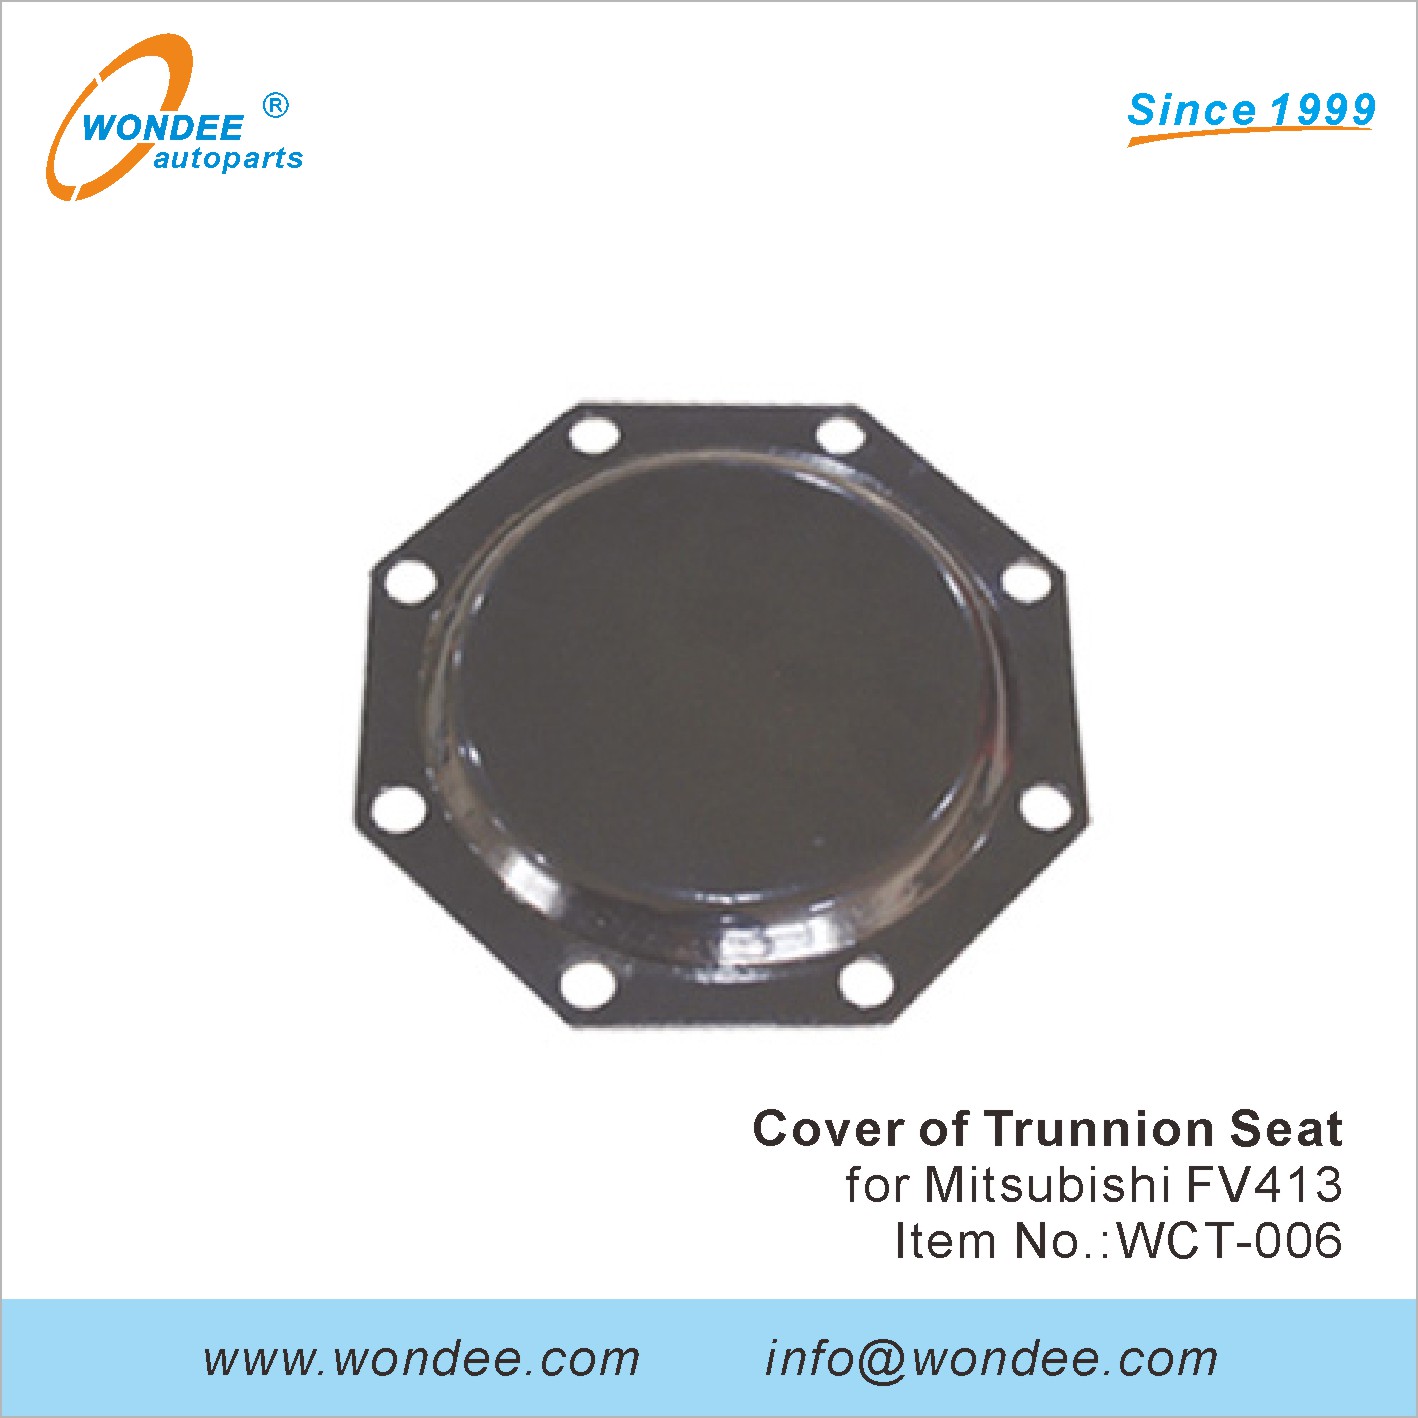 WONDEE cover of trunnion seat (6)